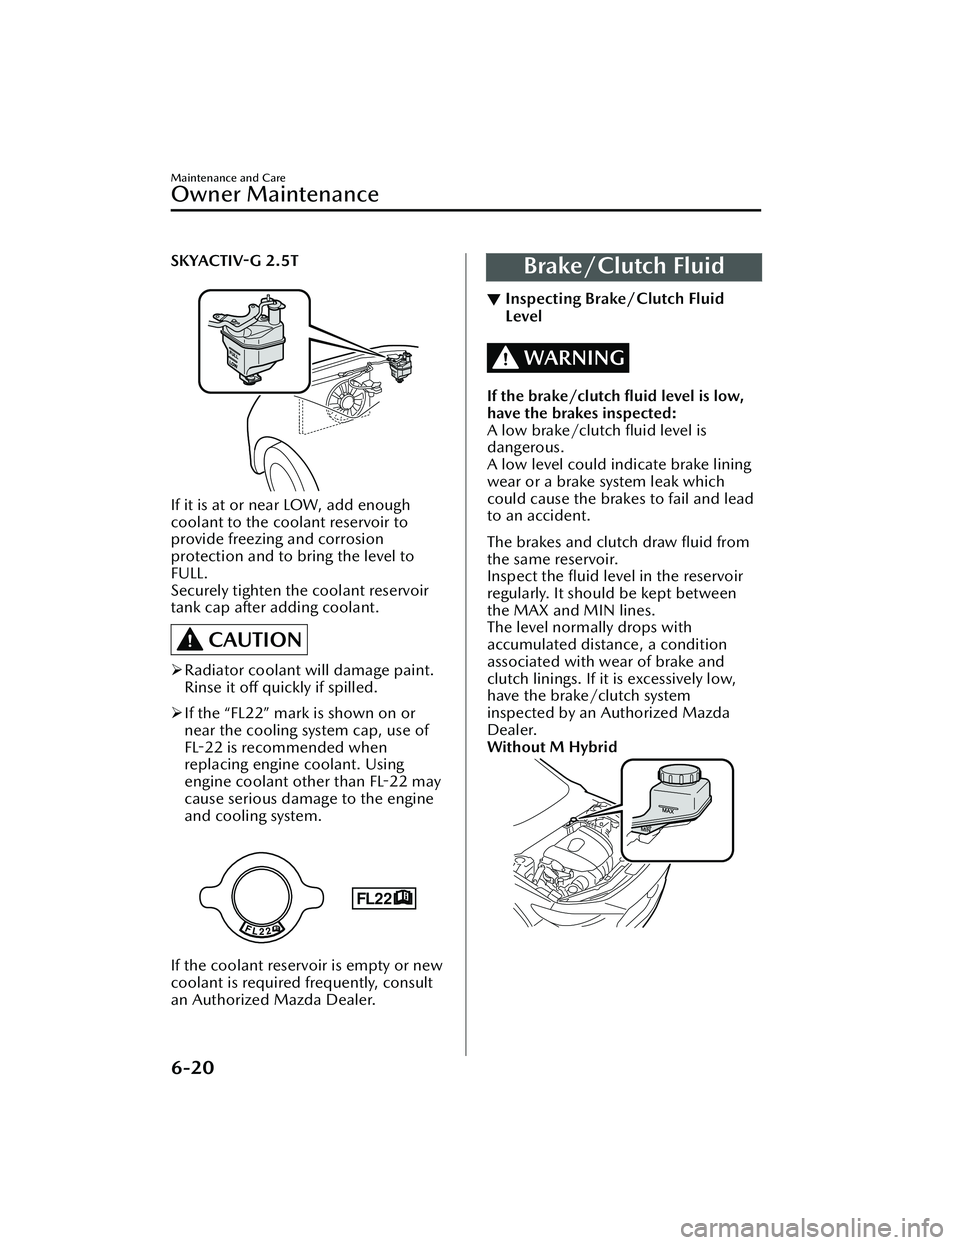 MAZDA MAZDA 2023  Owners Manual SKYACTIV-G 2.5T
 
FULL
LOW
If it is at or near LOW, add enough
coolant to the coolant reservoir to
provide freezing and corrosion
protection and to bring the level to
FULL.
Securely tighten the coolan